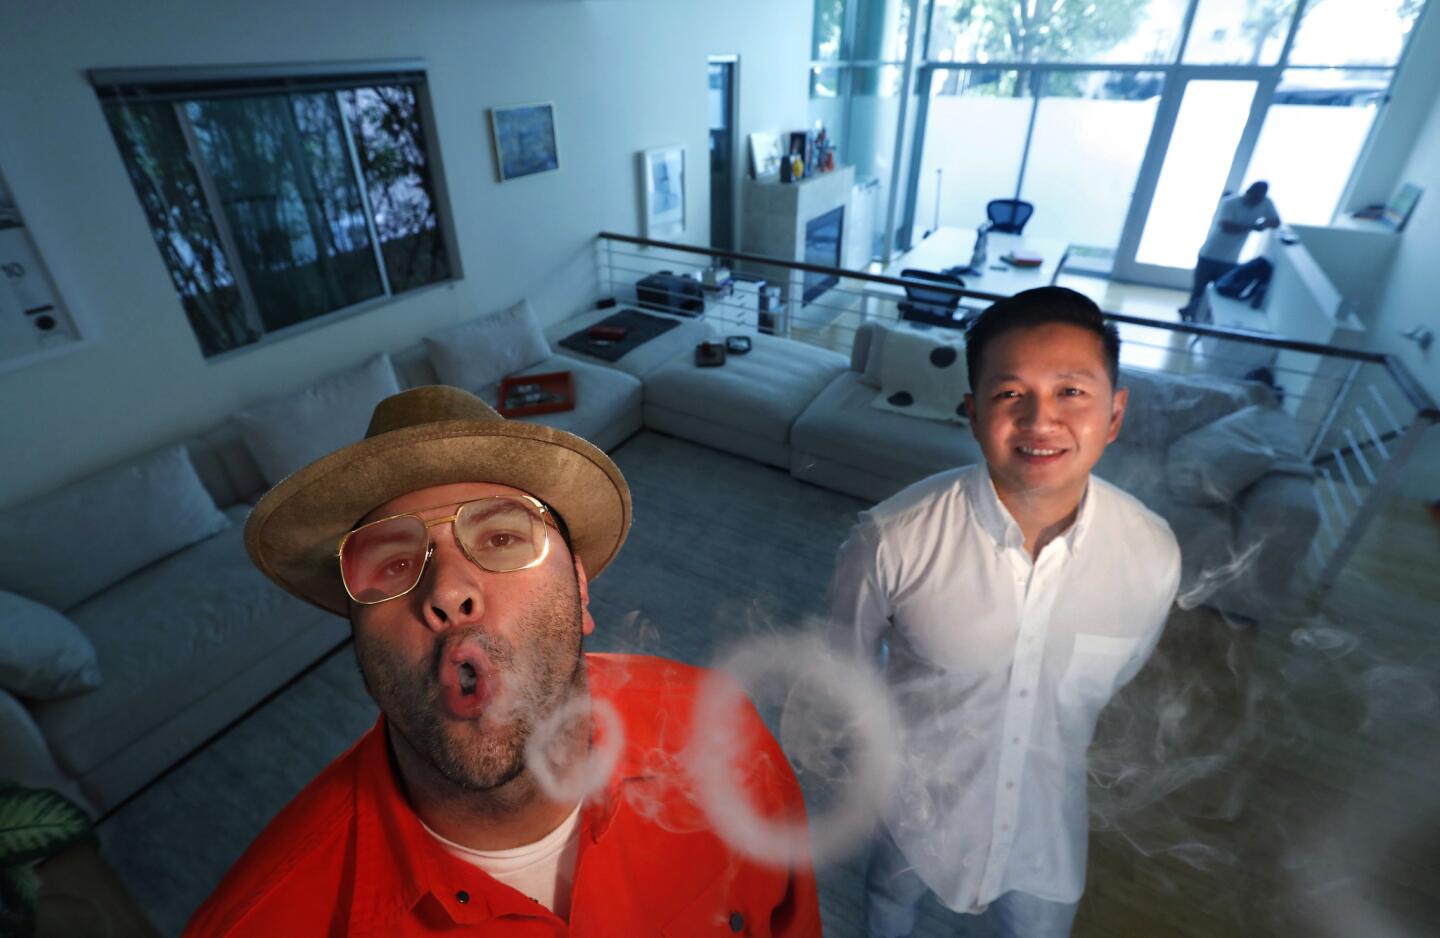 Will Htun, right, is chief executive of the Sherbinskis cannabis brand. His sleek, minimal live/work space is meant to be comfortable for both activities. Founder Mario Sherbinski makes himself at home.